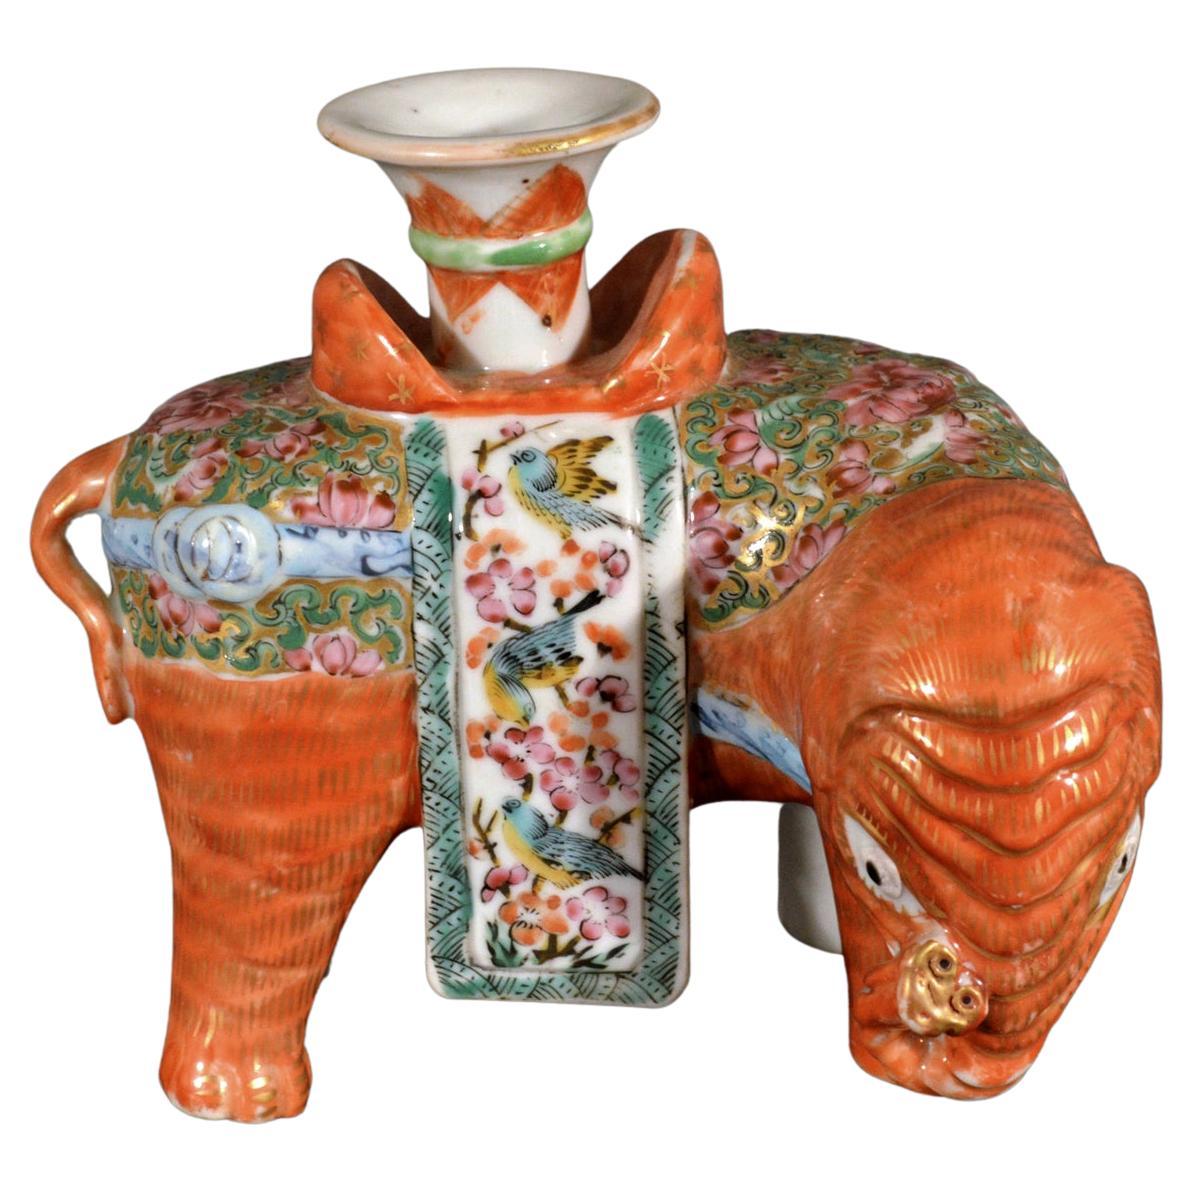 Chinese Export porcelain canton Famille rose elephant modeled as a candlestick, 
Circa 1860 

An upward-pointed elephant trunk is said to bring energy, luck, prosperity and kindness. The elephant raises its trunk to greet friends and express